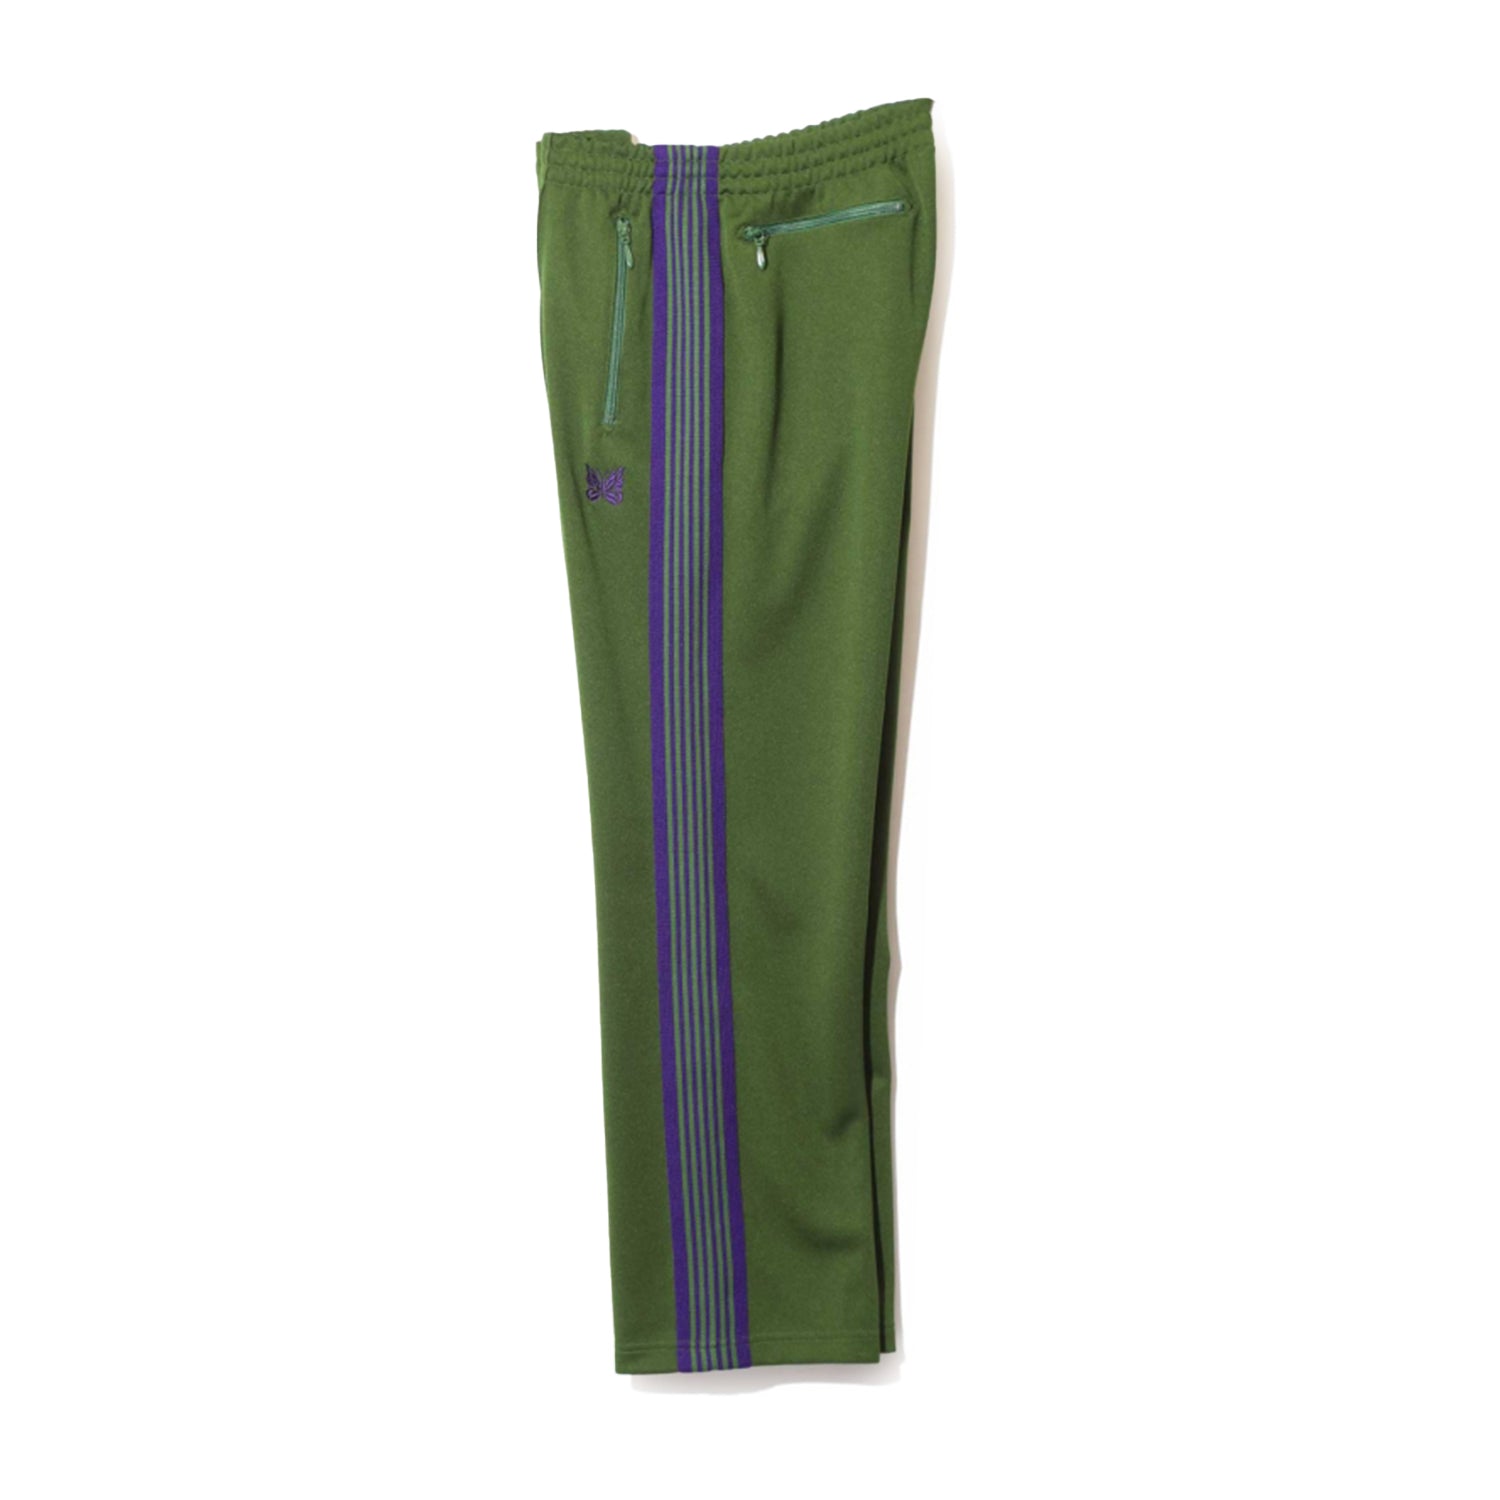 Track Pant - Poly Smooth - INVINCIBLE